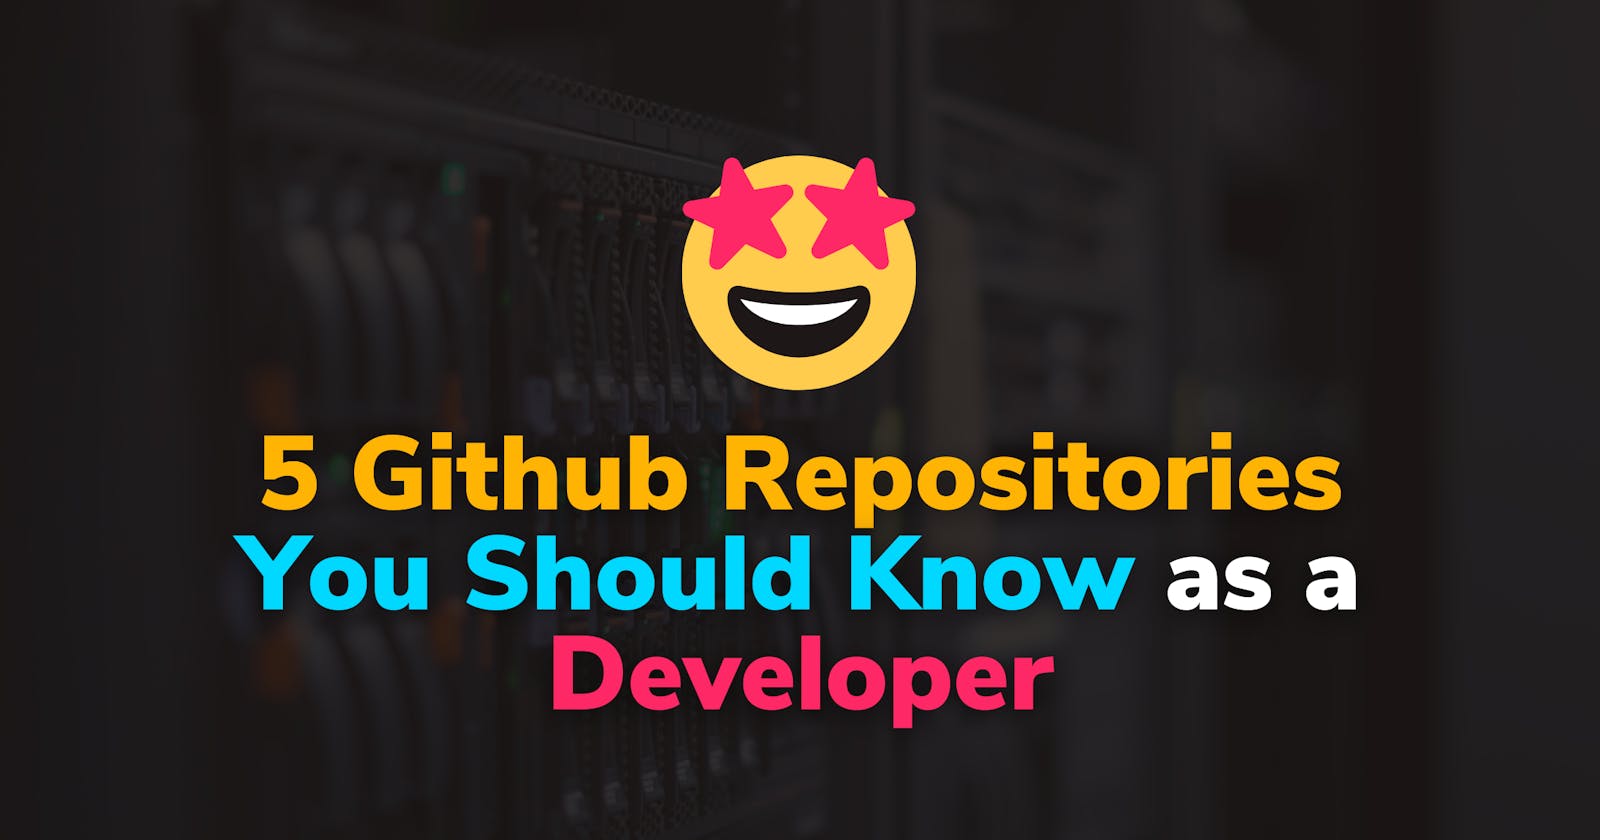 5 Github Repositories You Should Know as a Developer